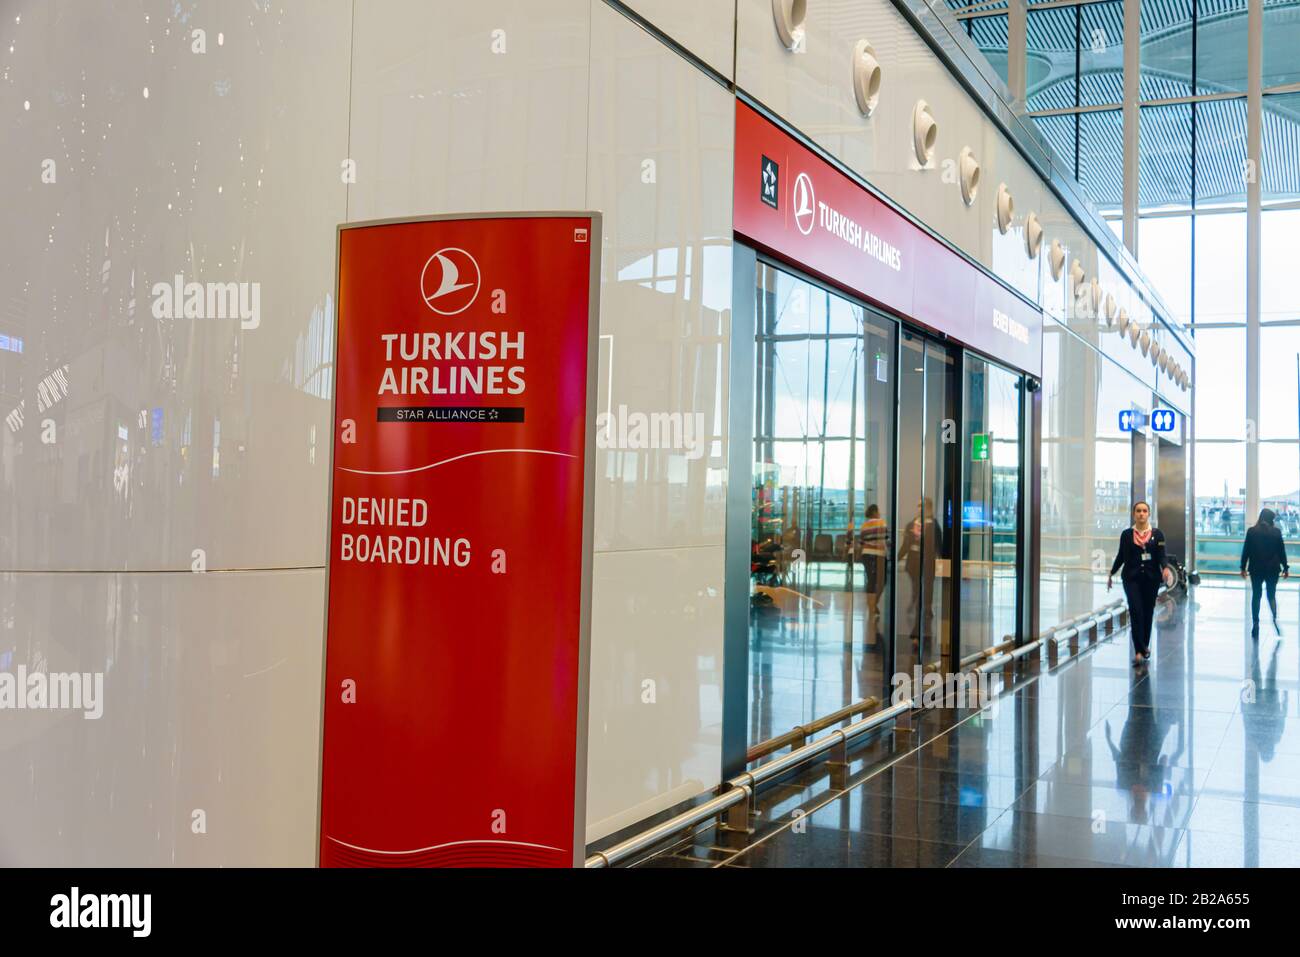 Denied Boarding office for Turkish Airlines, Istanbul International Airport, Turkey Stock Photo